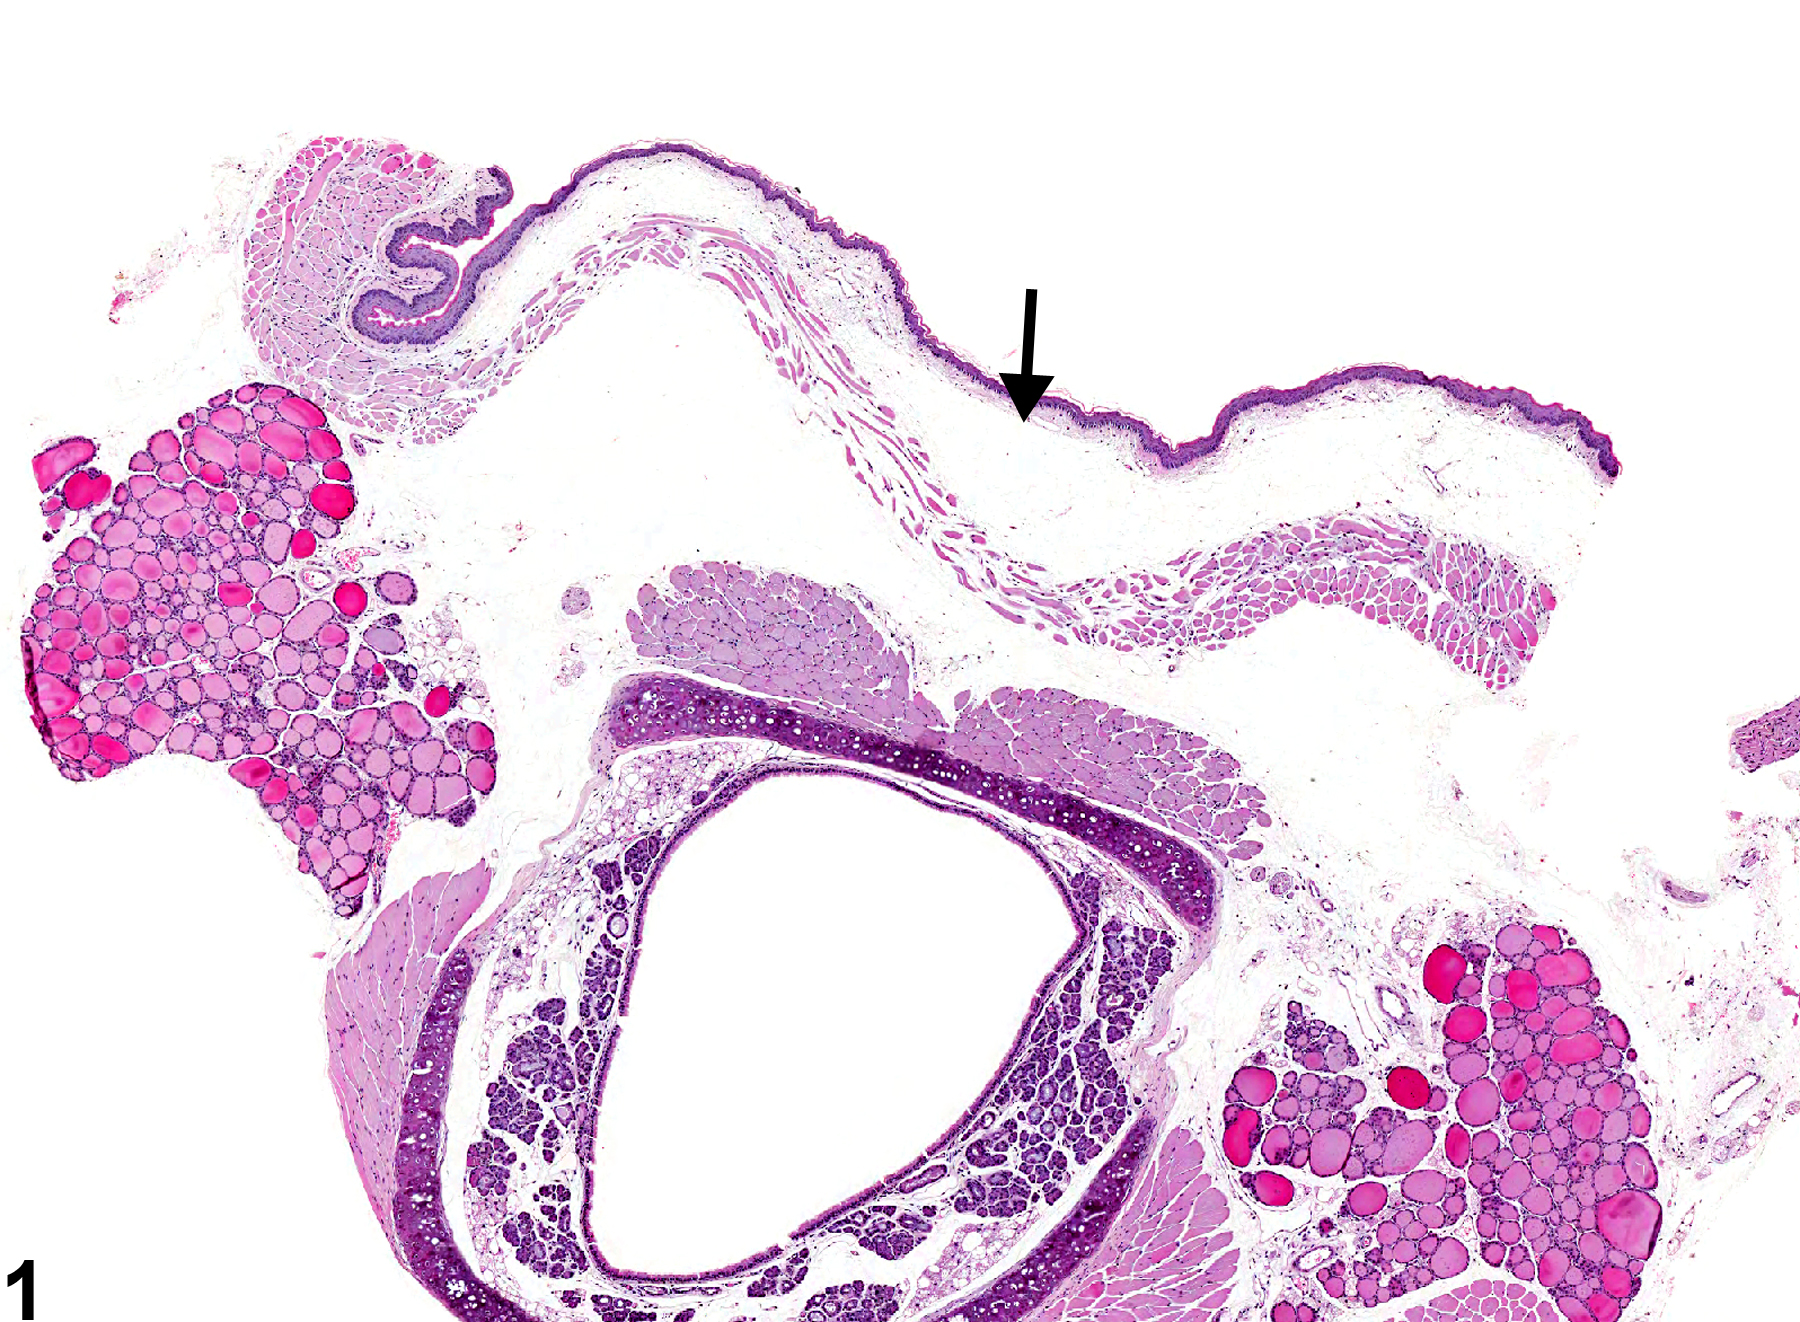 Image of edema in the esophagus from a male B6C3F1 mouse in a chronic study